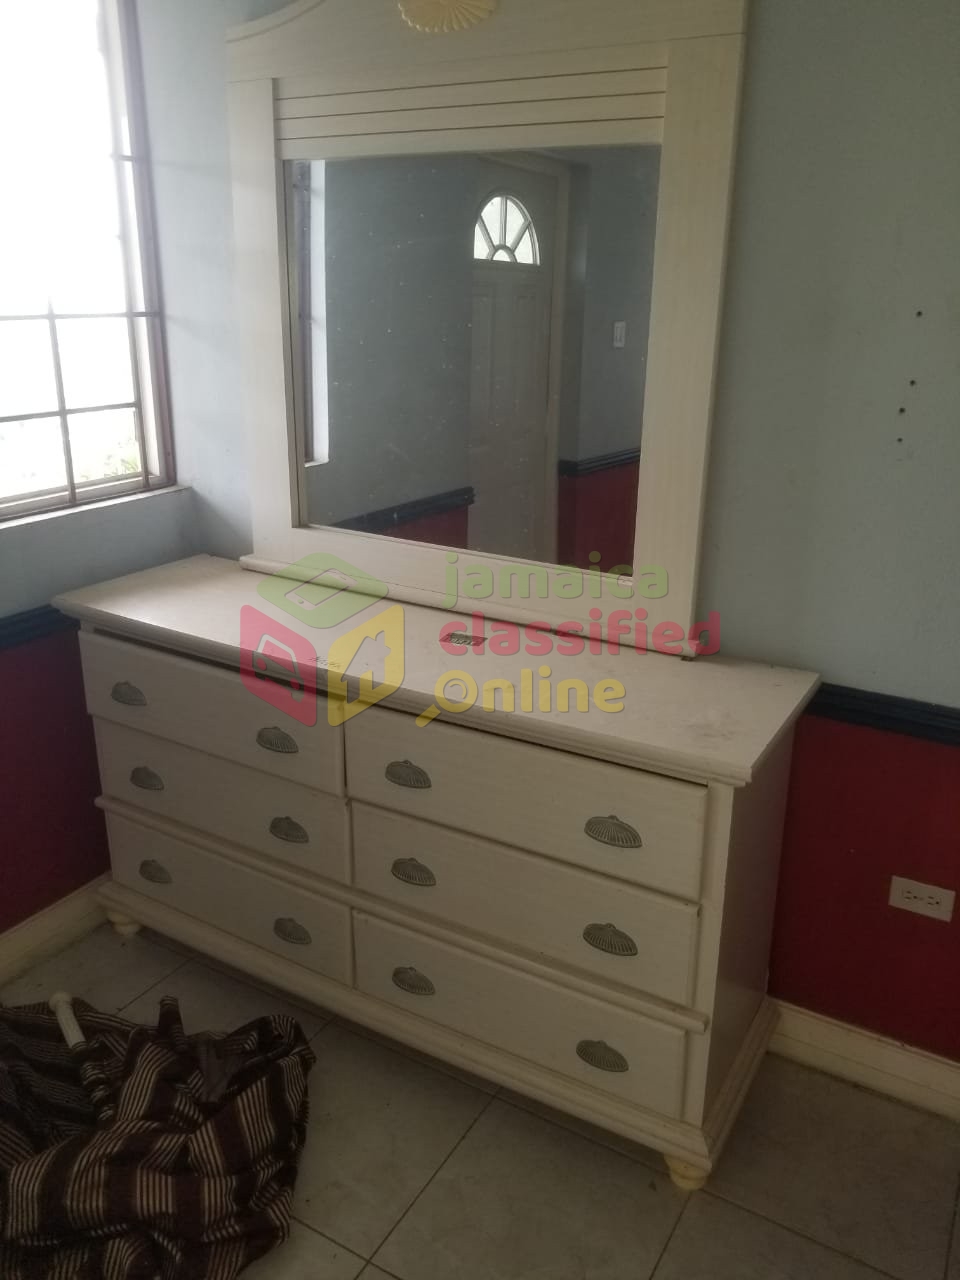 Used Furniture's In Good Condition for sale in Havendale ...